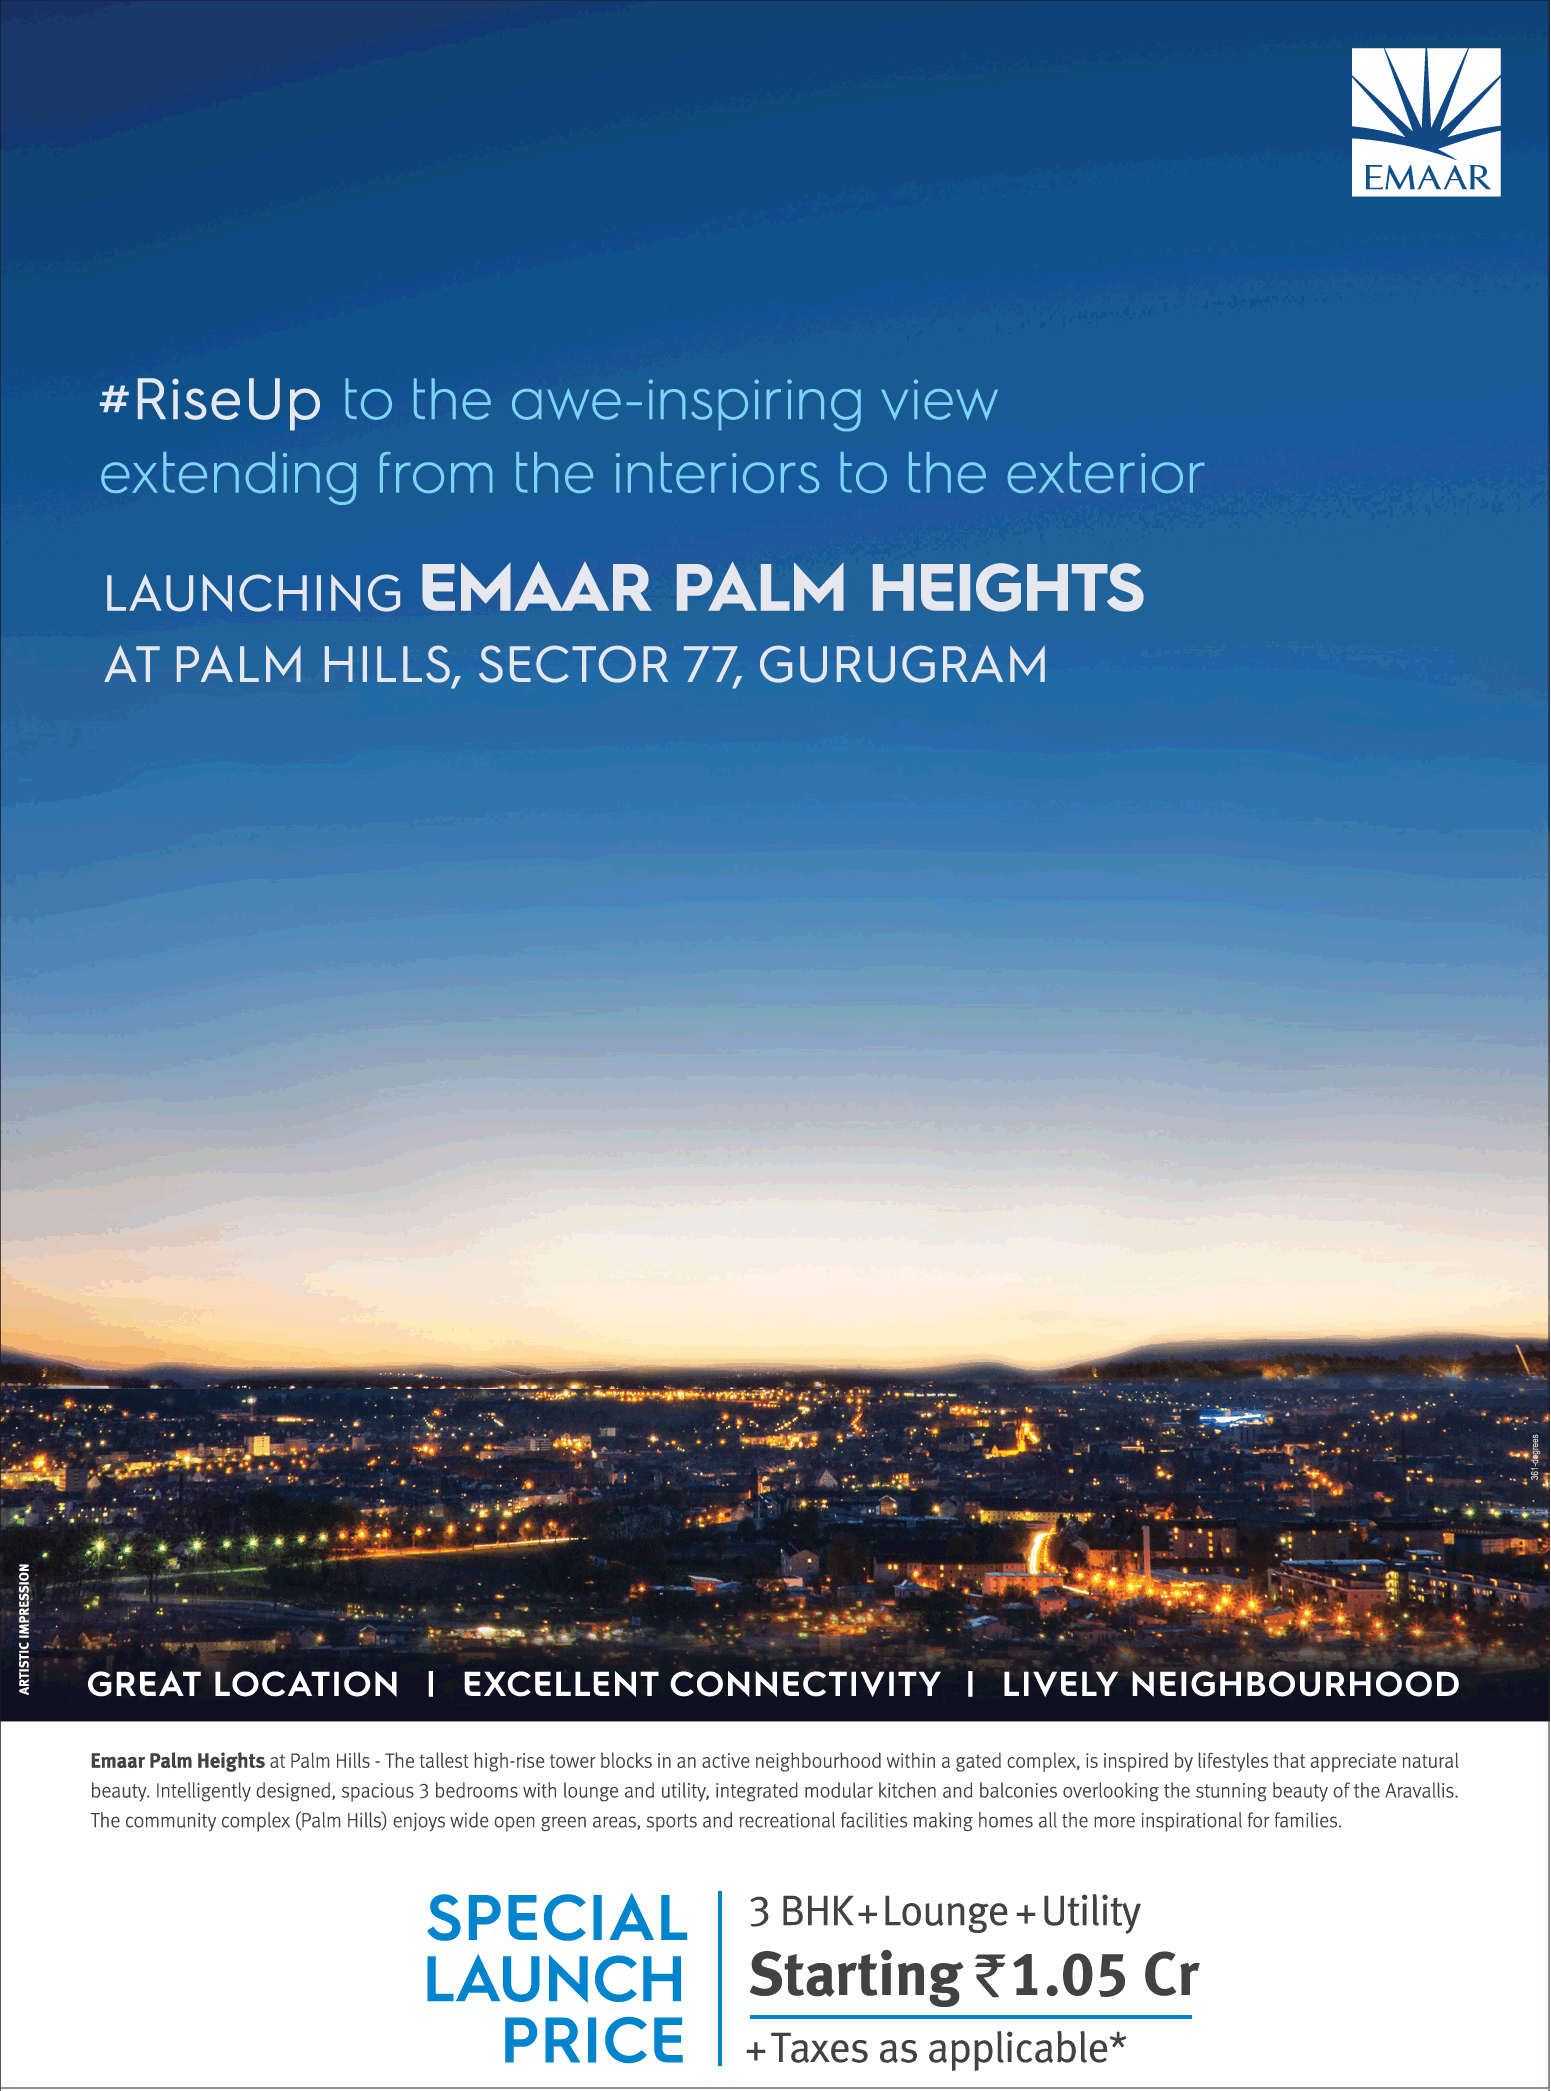 Special launch 3 bhk @ Rs 1.05 Cr. at Emaar Palm Heights in Gurgaon